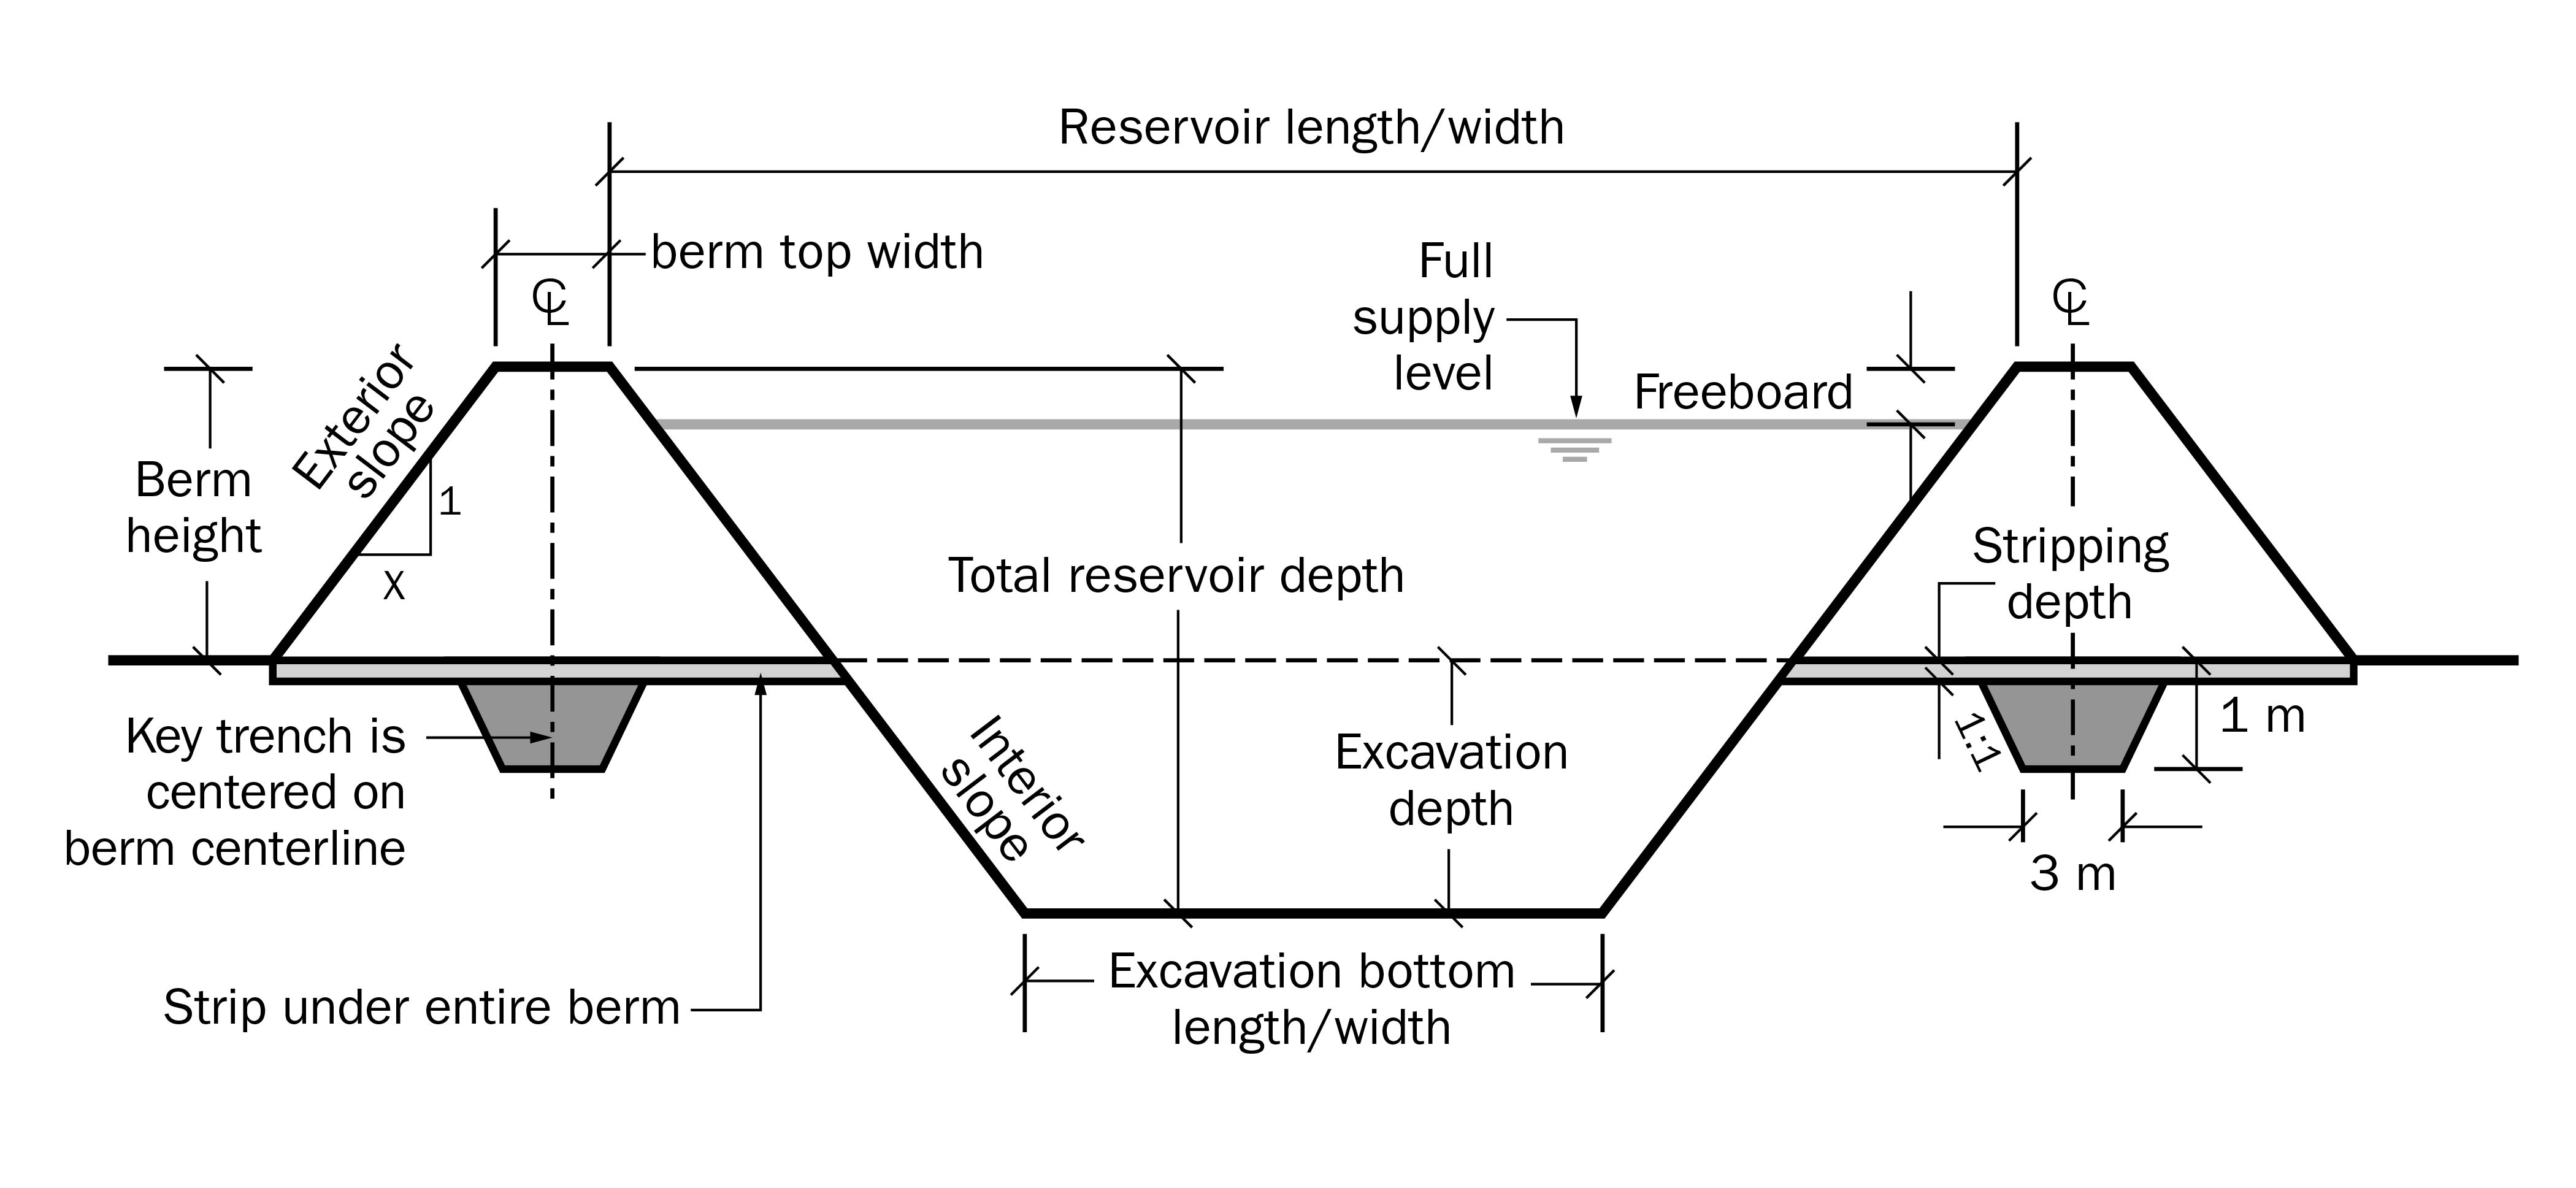 Design drawing for an above and below grade reservoir